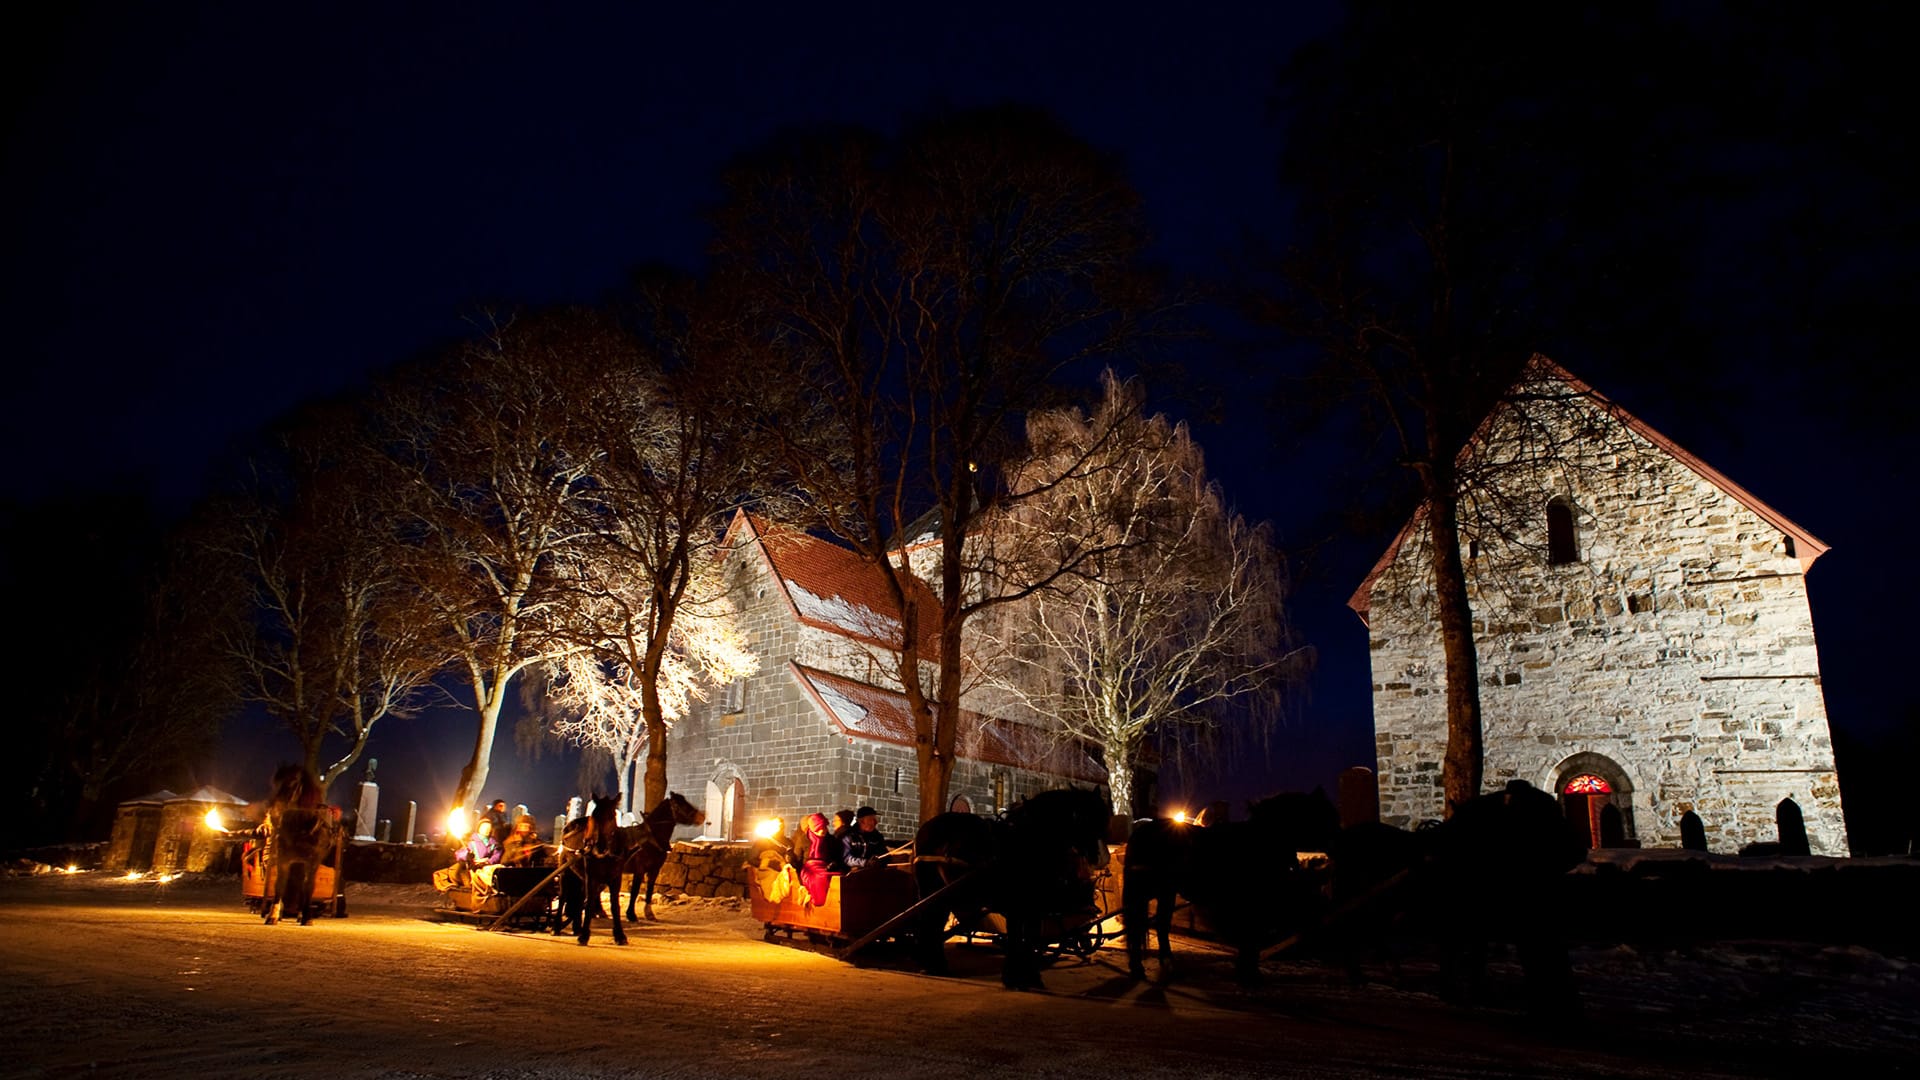 Horses and carriages lit with torches at night in front of the stone buildings of Granavolden Gjæstgiveri.